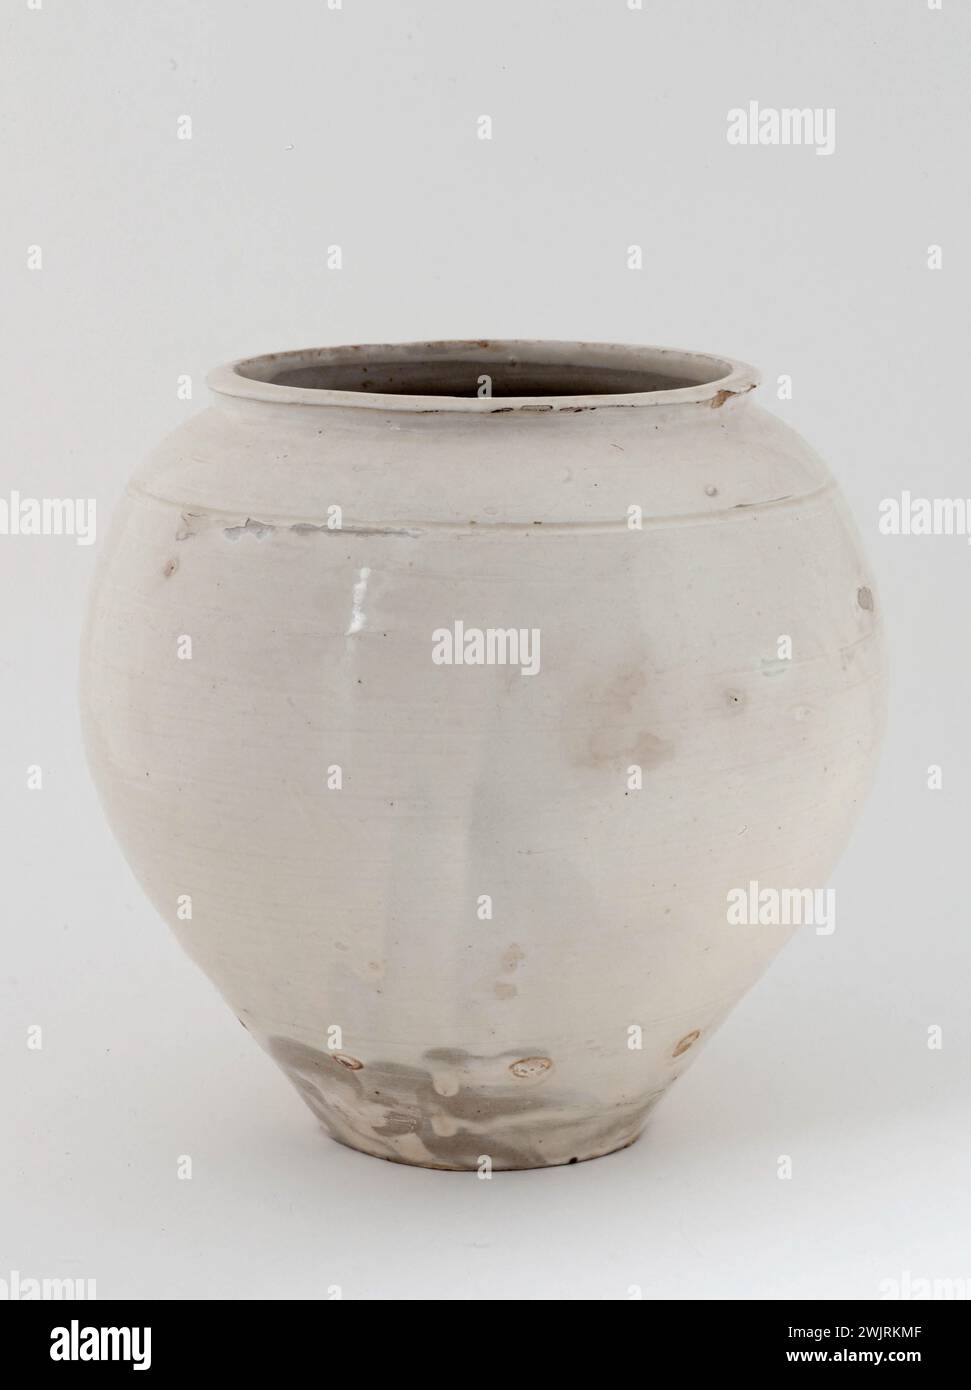 Jar '. Sandstone, white slip under transparent cover. Song / Yuan. Paris, Cernuschi museum.chine, Song dynasty (960-1279) / Yuan (1279-1368). Chinese art, Chinese ceramic, container, Song dynasty, Yuan dynasty, Song time, Yuan time, oval form, gres, jar, container, terracotta Stock Photo